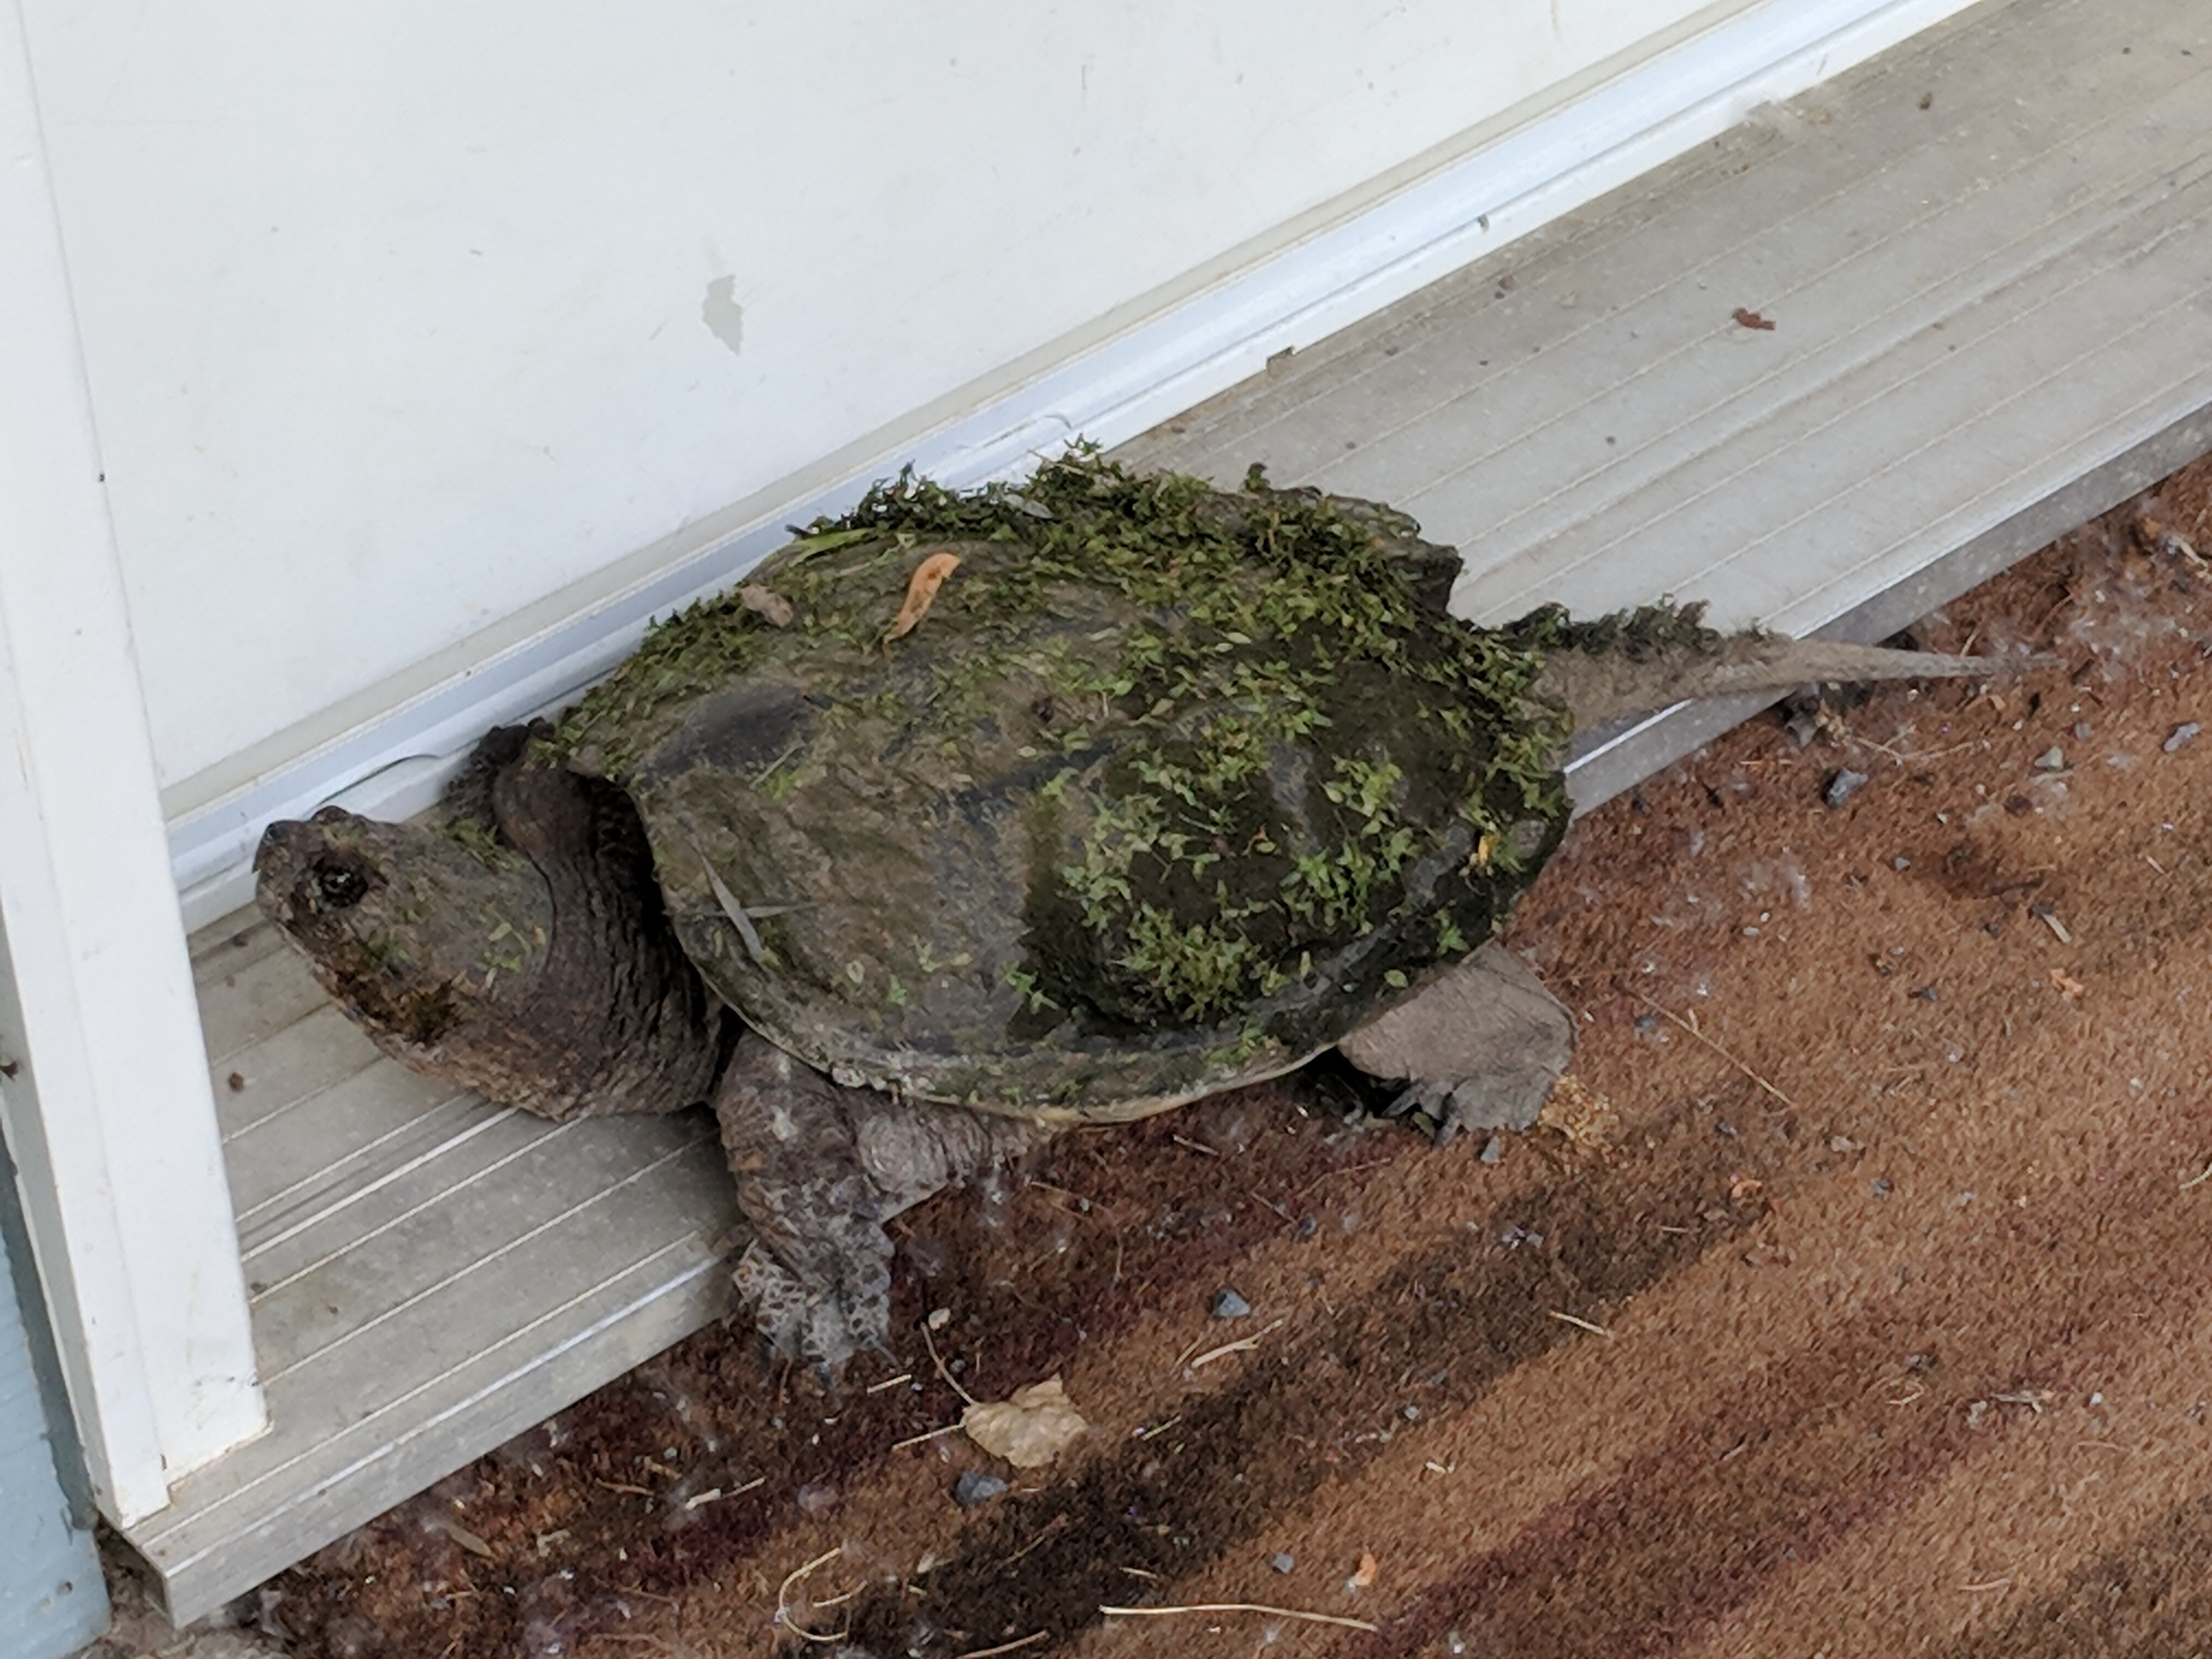 Snapping Turtle at the door!